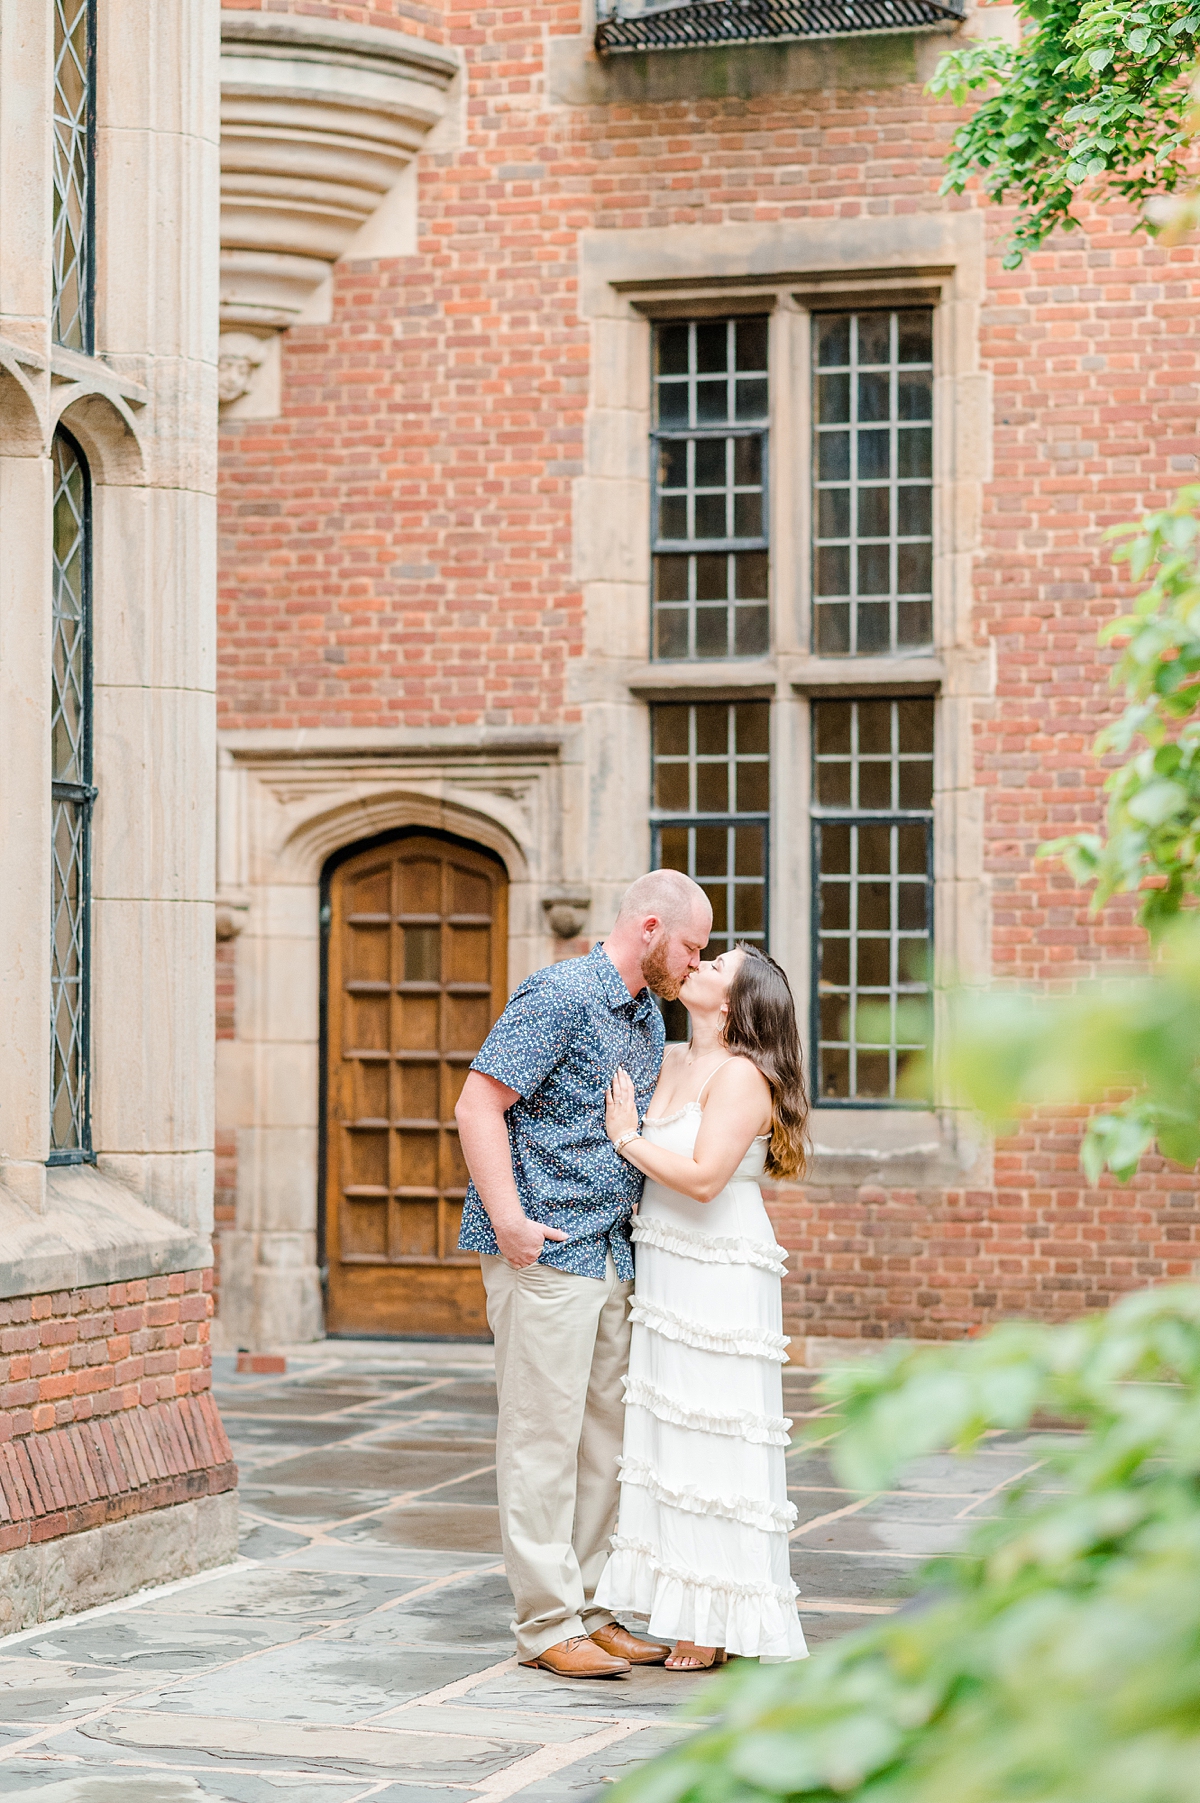 Branch Museum Engagement Session in Downtown Richmond. Virginia Wedding Photographer Kailey Brianne Photography. 